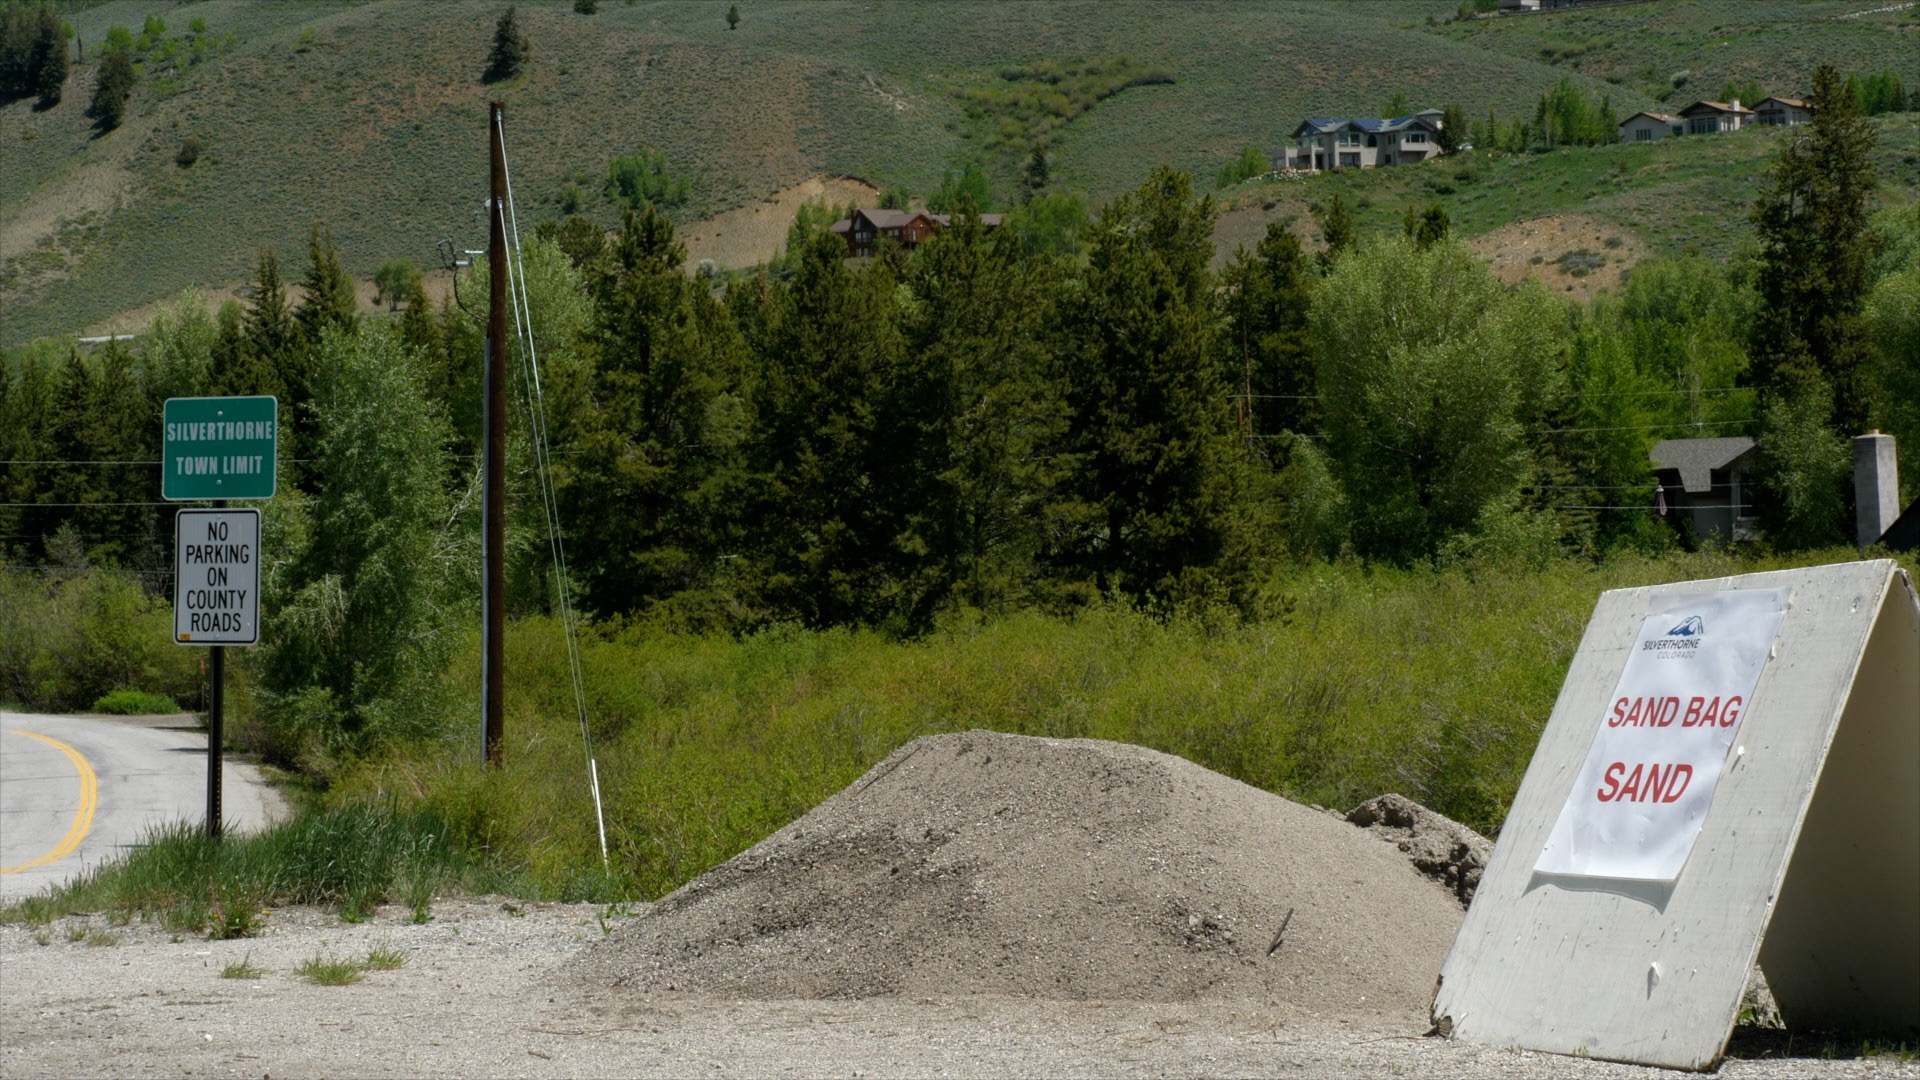 This picture shows a pile of sand that is used to fill sandbags to protect against flooding.